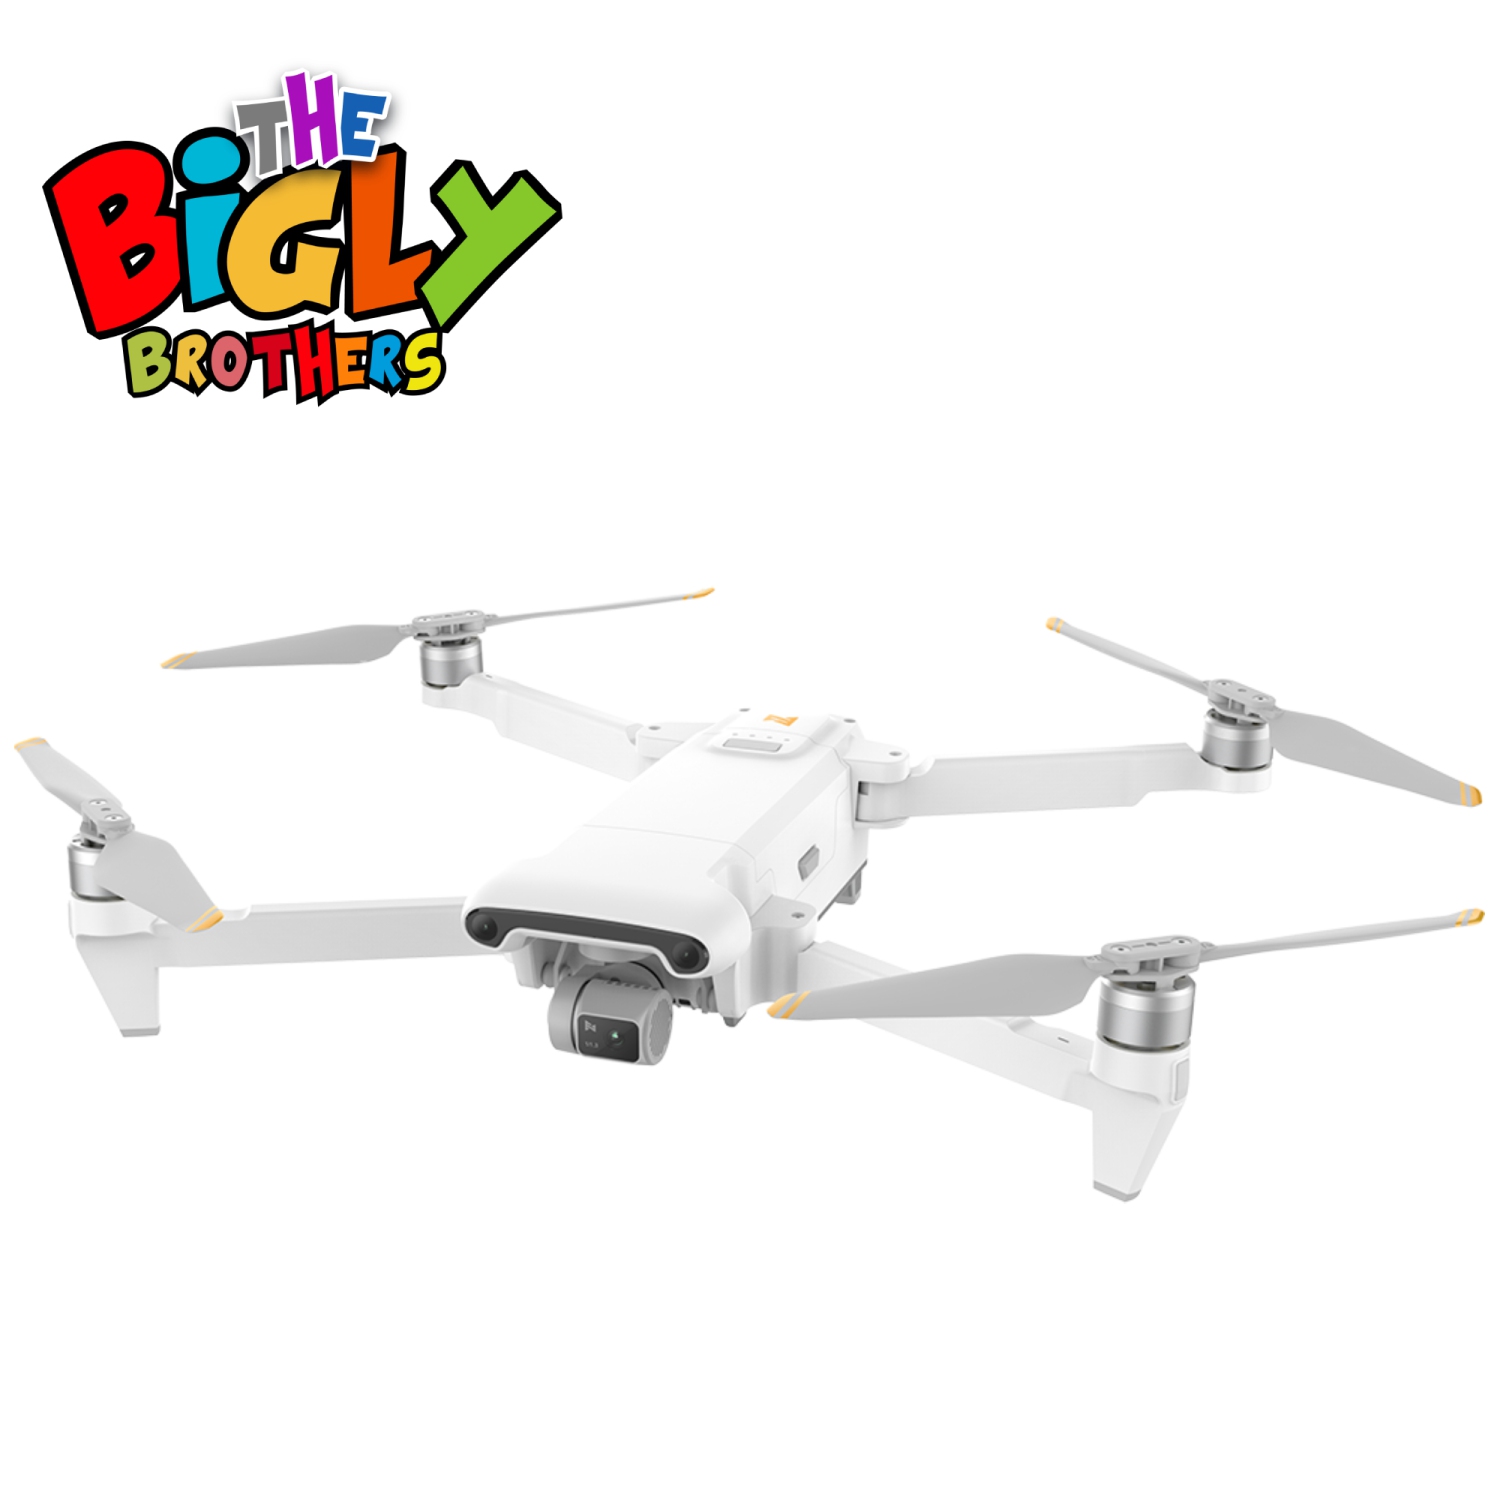 The Bigly Brothers GD93 Midnight Specter GPS Drone, 720 Degrees Obstacle Avoidance, Smart Return home, 4K Camera 1000m Range, 90mins Flight Time Below 249g, carrying case included